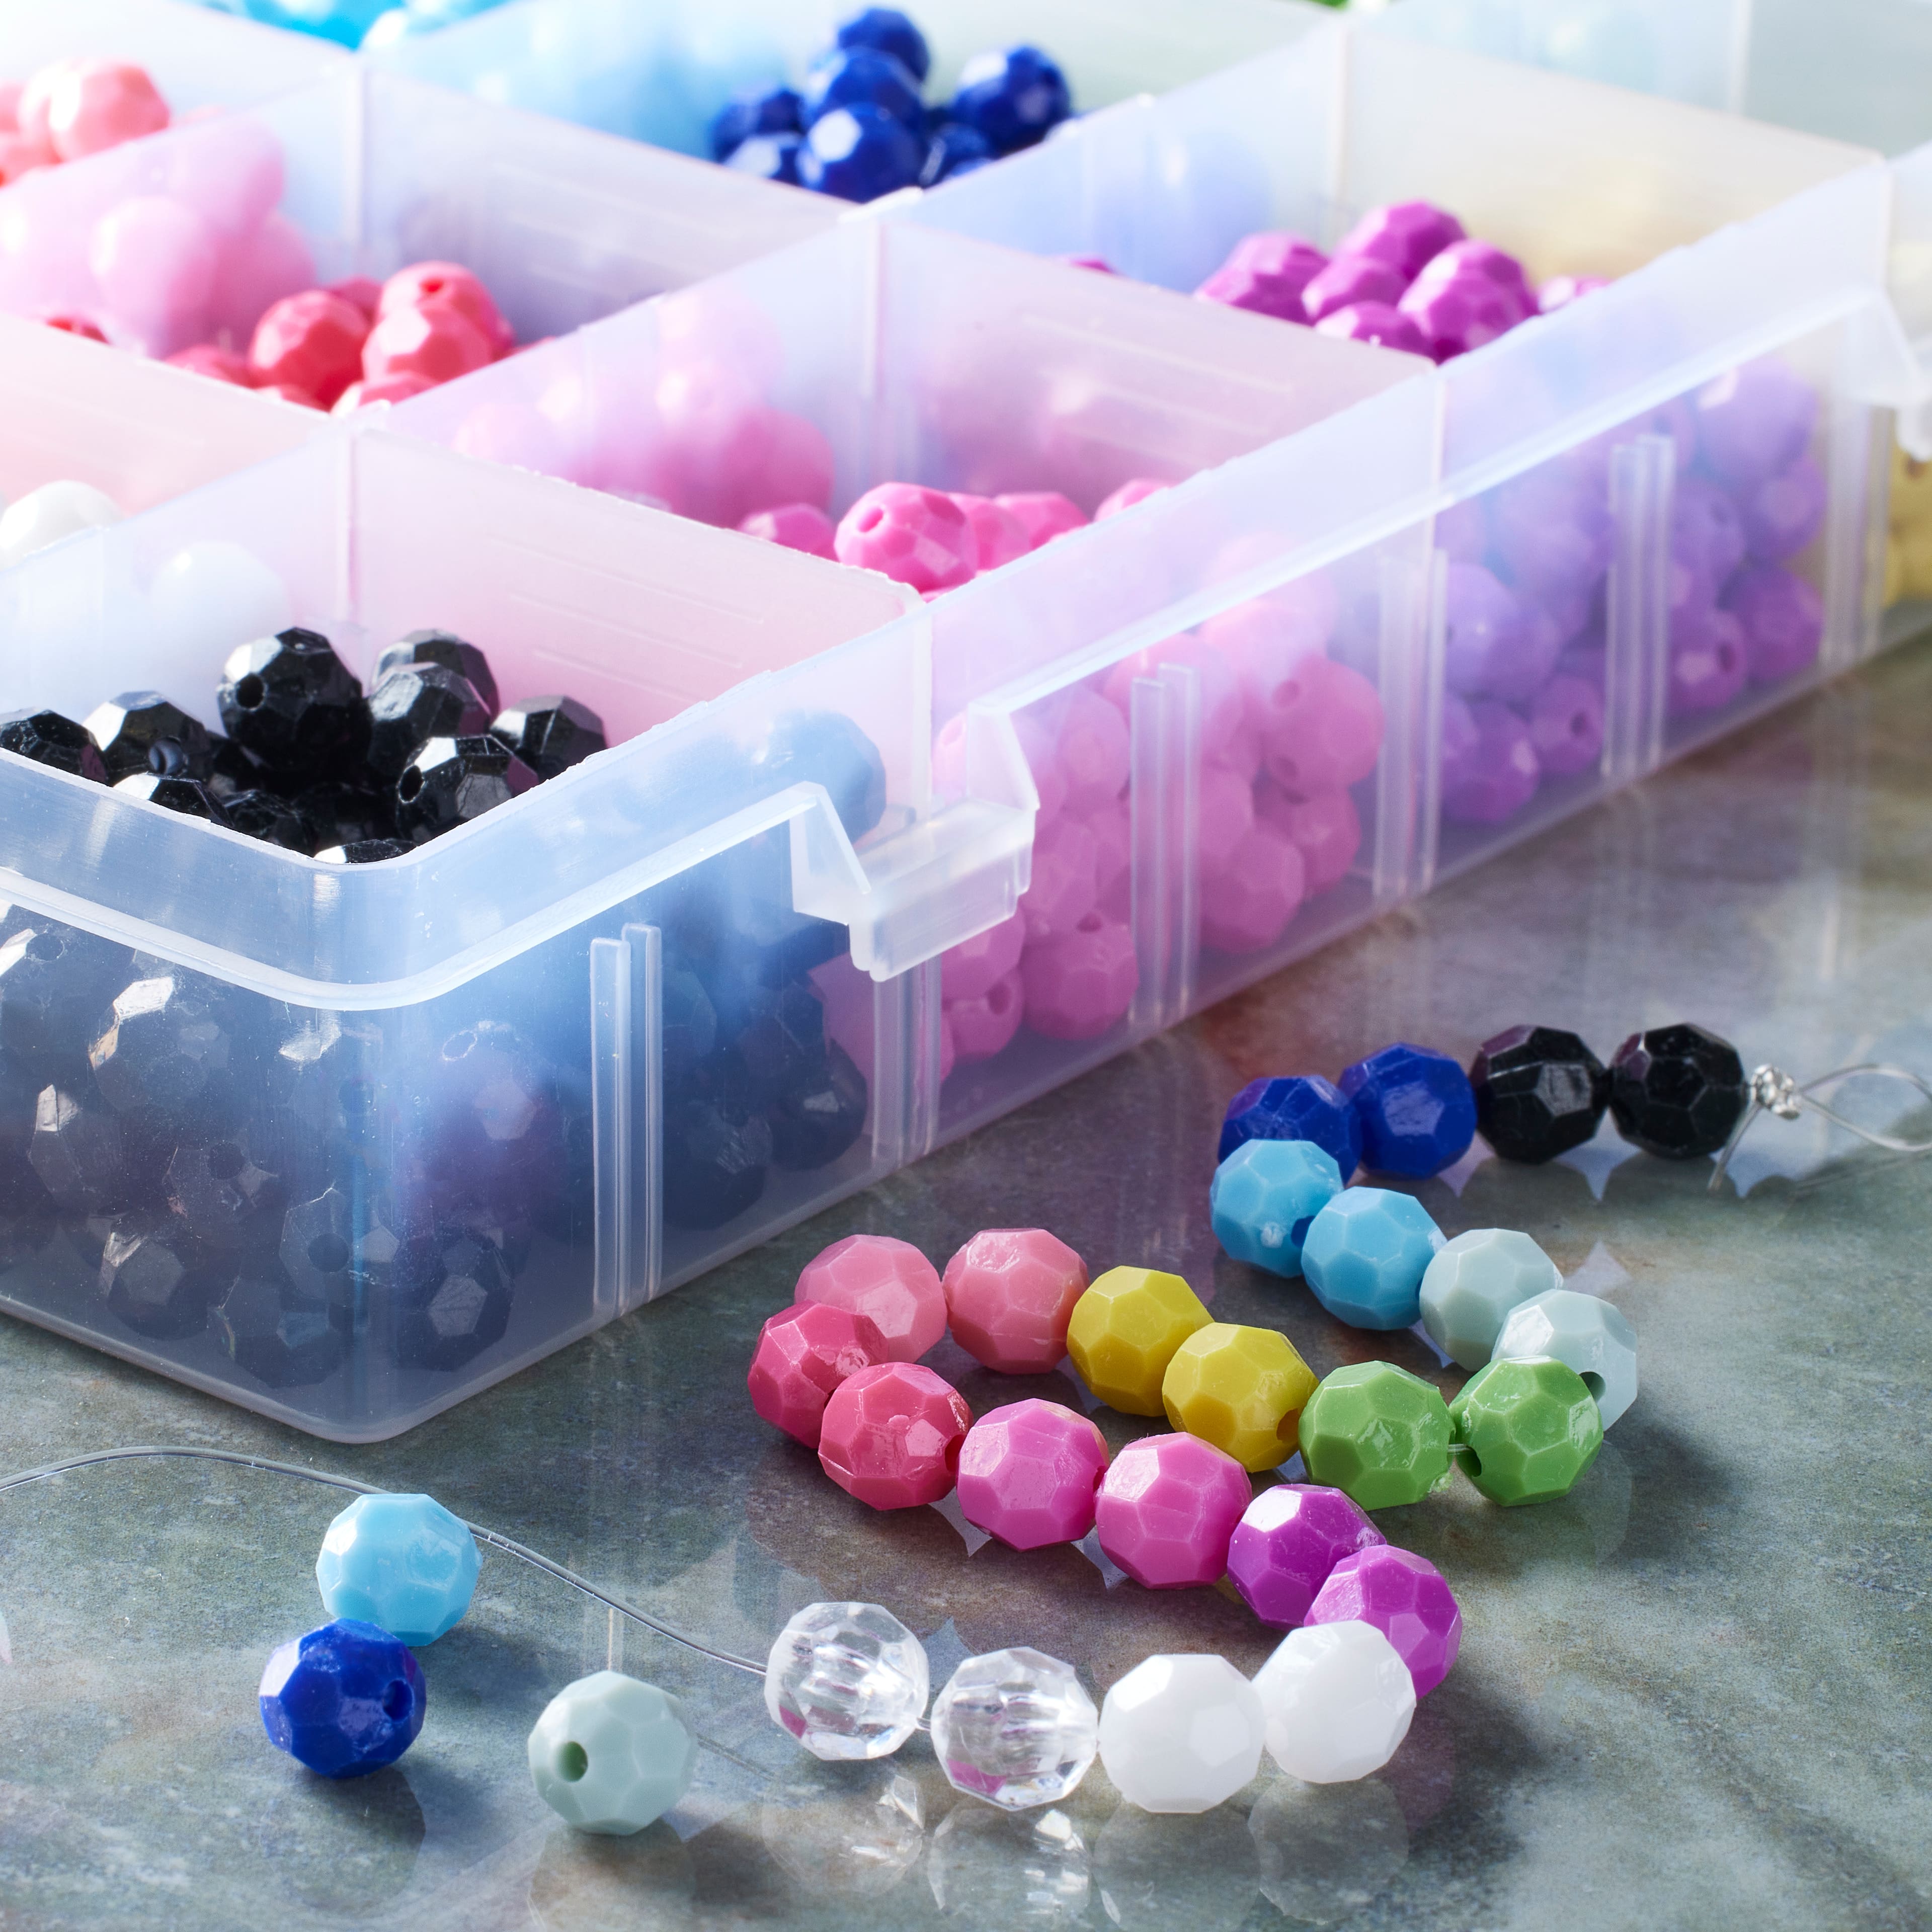 12 Pack: Multicolored Etched Crafting Beads by Bead Landing™